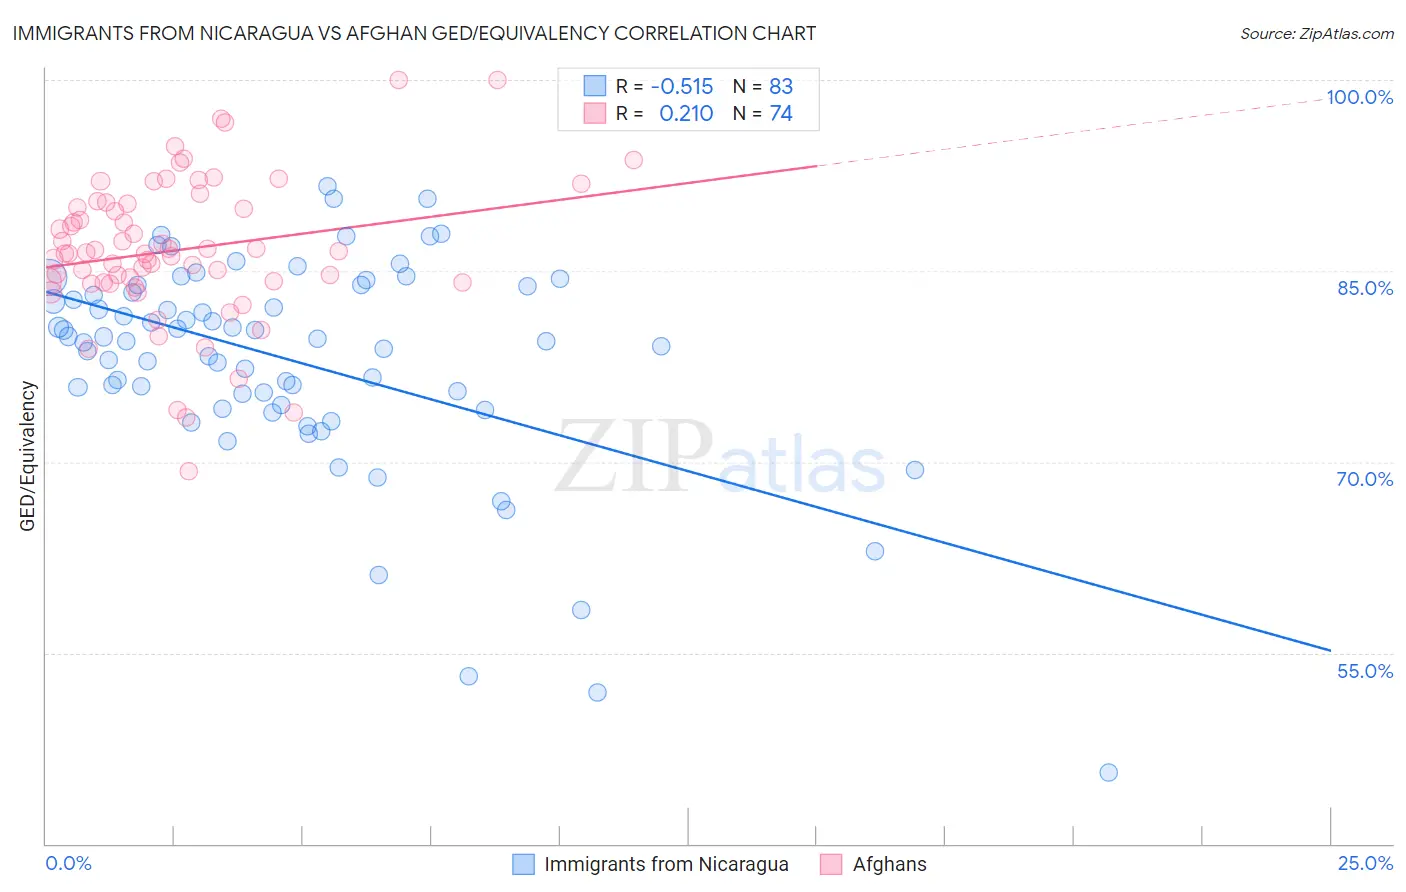 Immigrants from Nicaragua vs Afghan GED/Equivalency